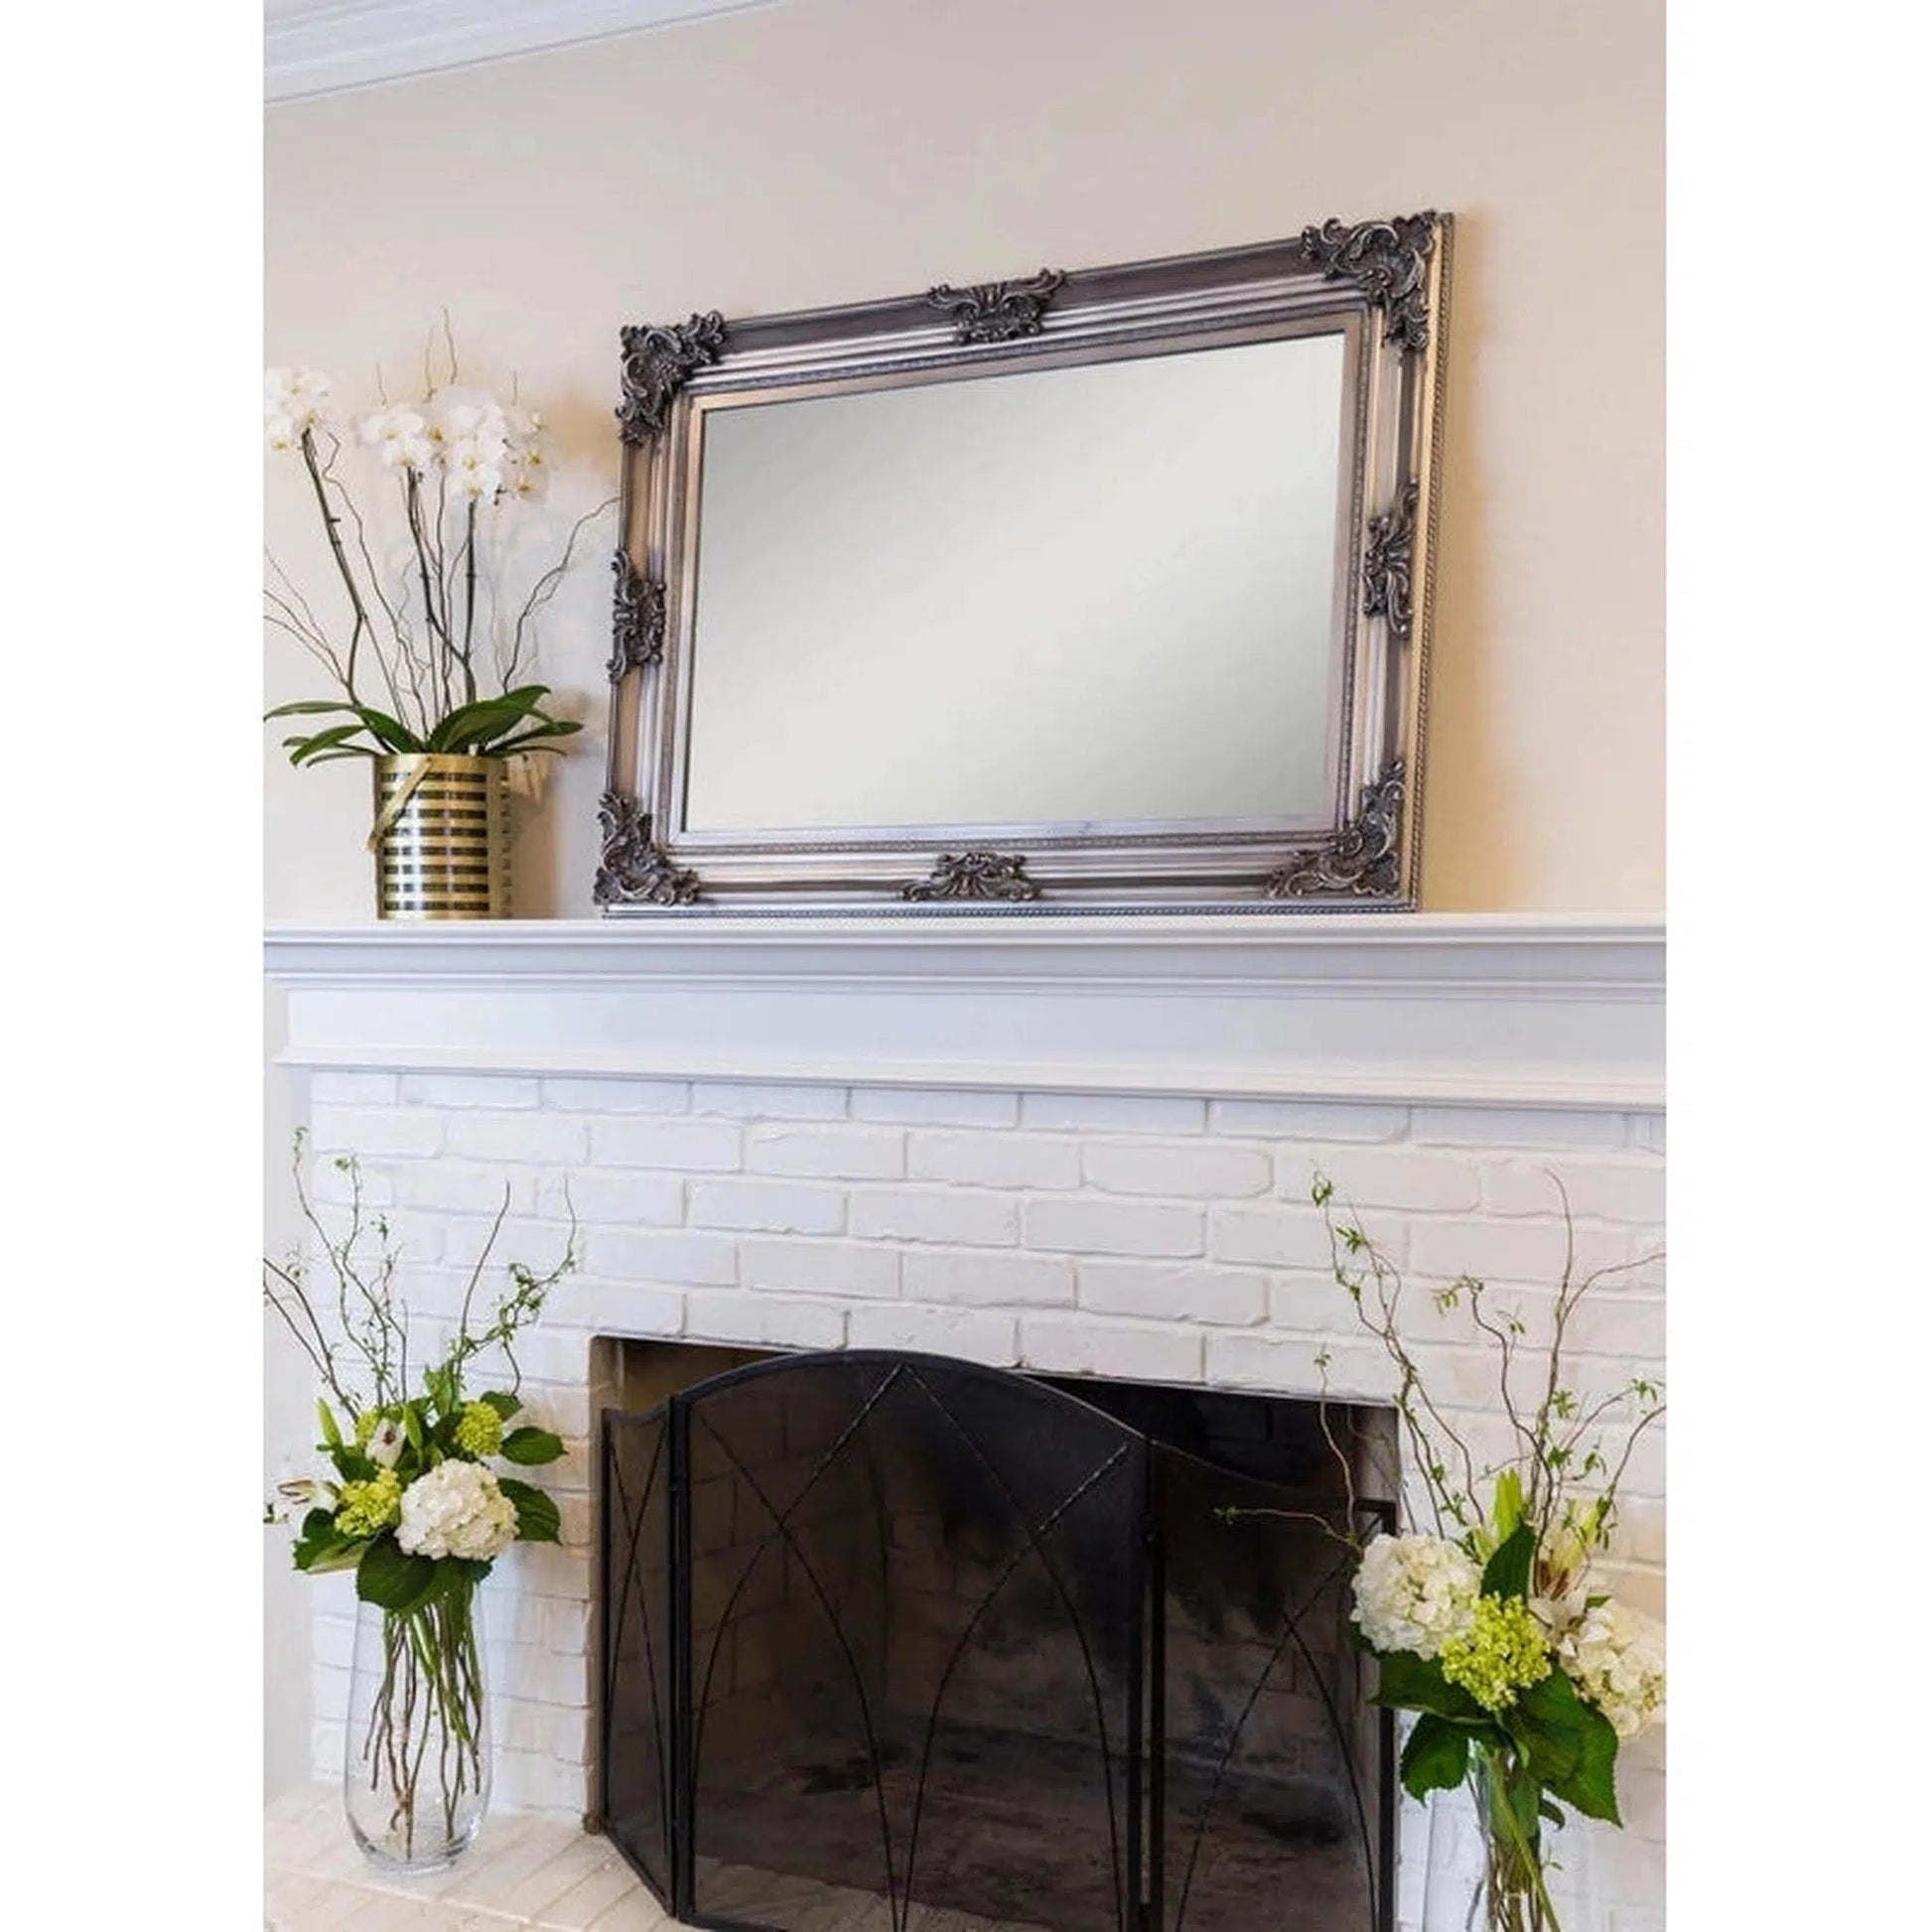 SBC Decor Beaumont 32" x 44" Wall-Mounted Wood Frame Vanity Wall Mirror In Antique Silver Finish